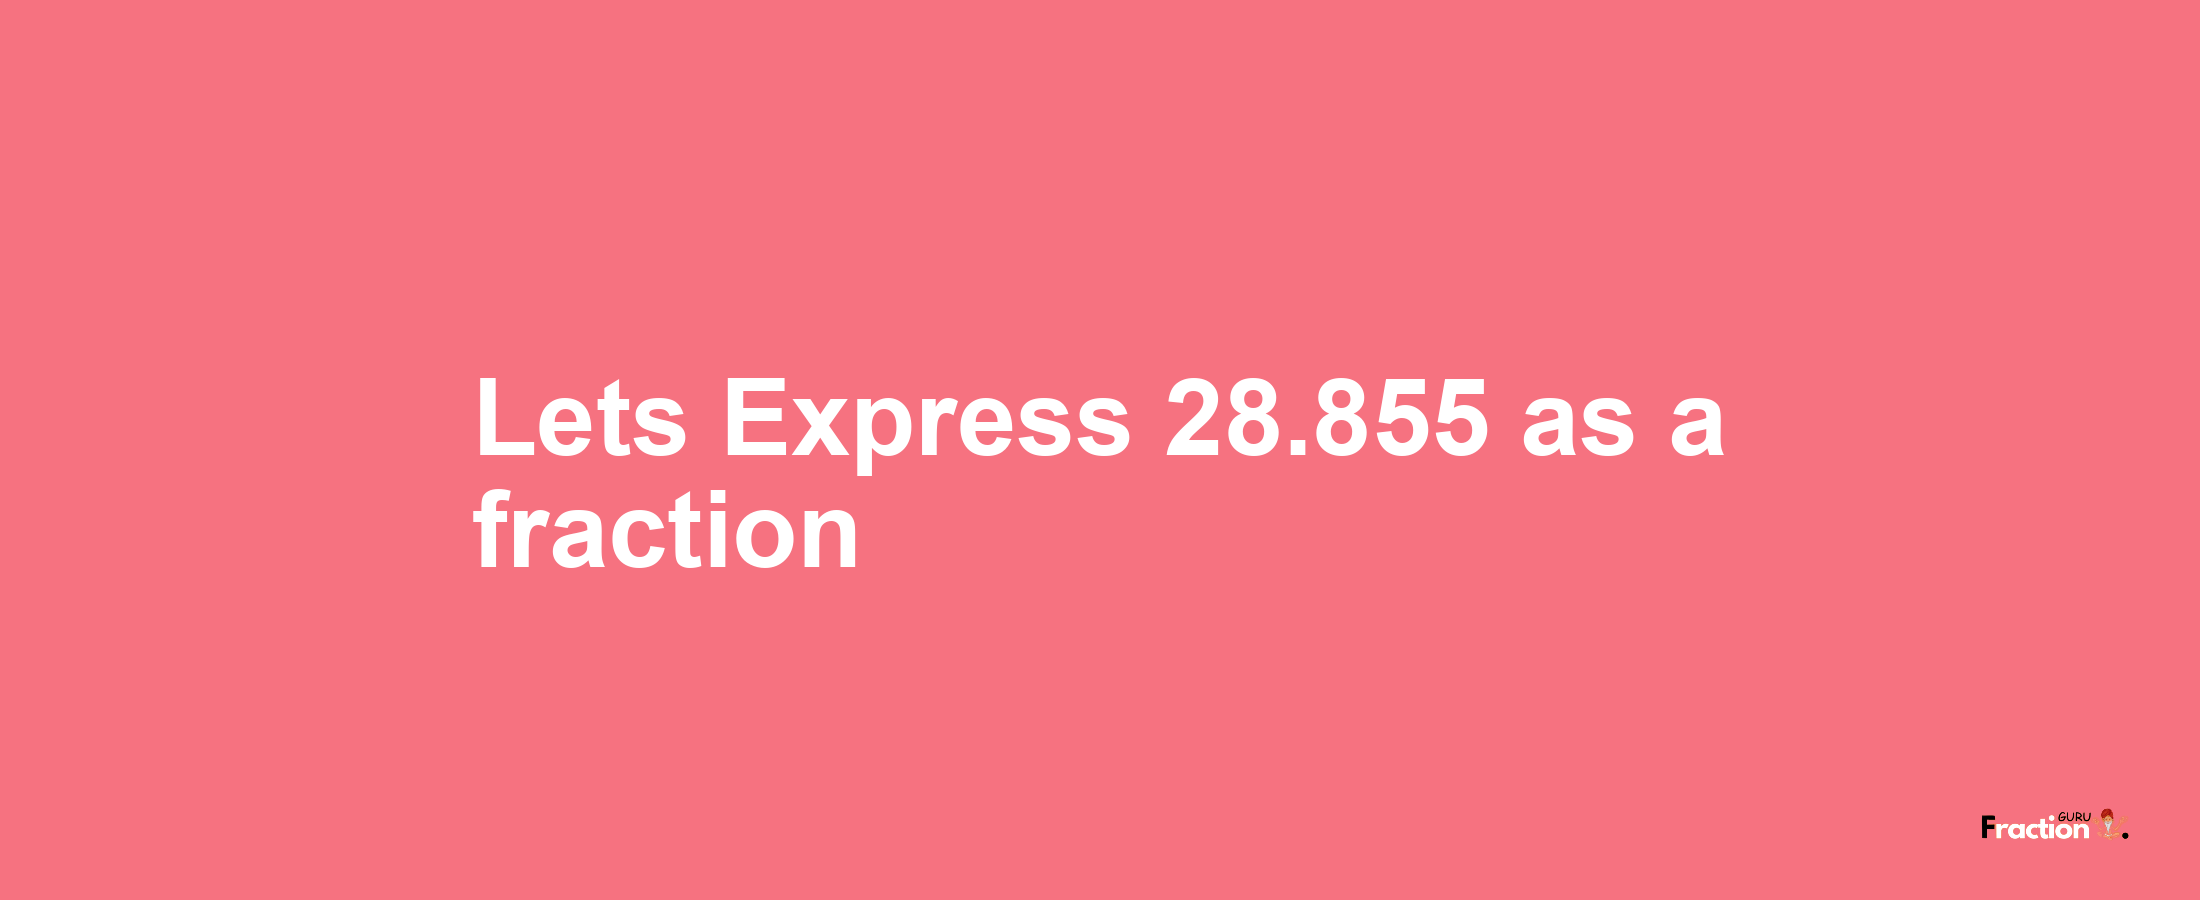 Lets Express 28.855 as afraction